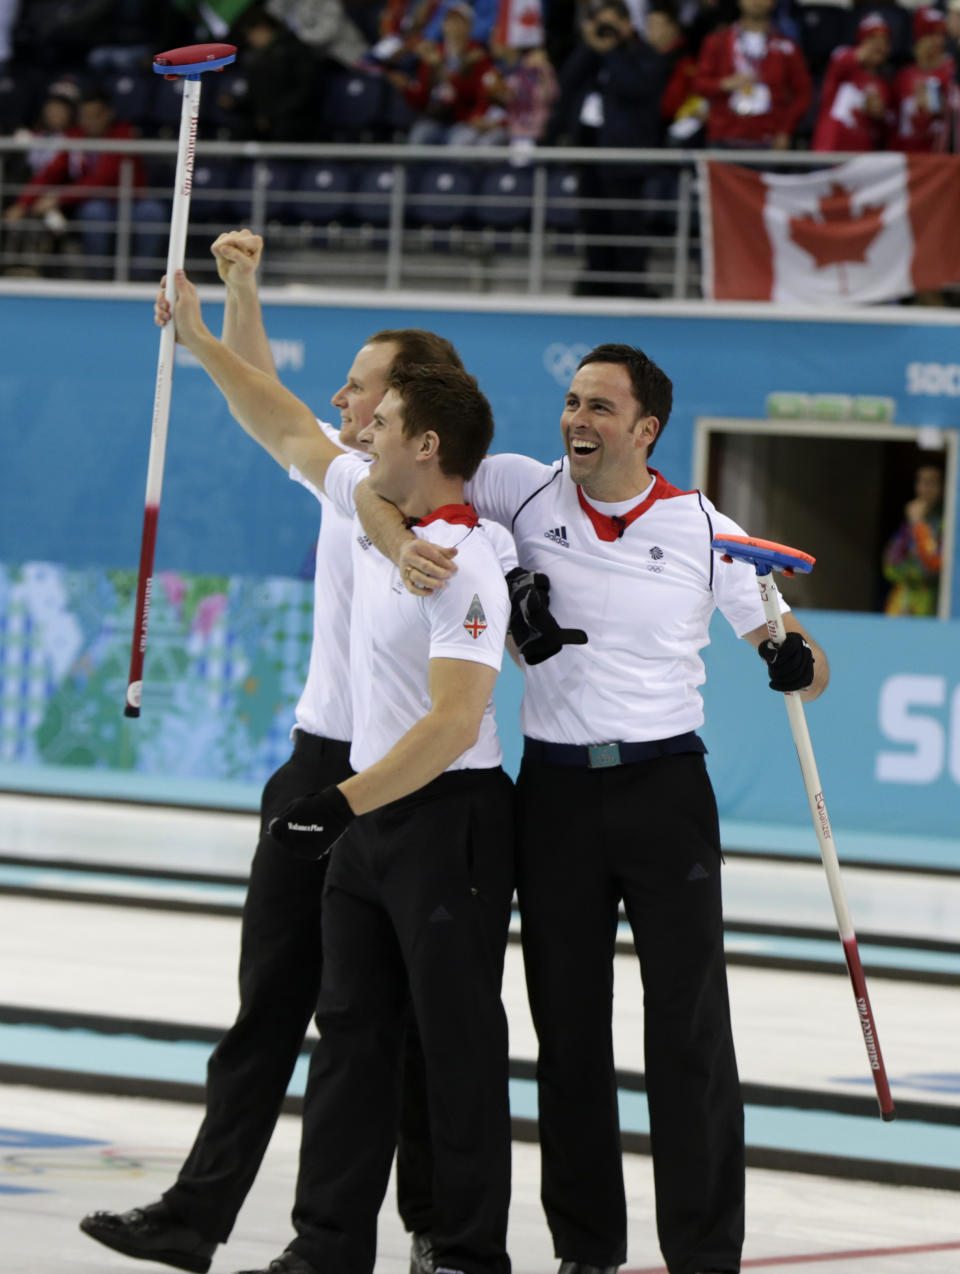 Britain’s skip David Murdoch, right, celebrates with teammates Michael Goodfellow, left, and Greg Drummond after defeating Sweden during the men's curling semifinal game at the 2014 Winter Olympics, Wednesday, Feb. 19, 2014, in Sochi, Russia. (AP Photo/Robert F. Bukaty)